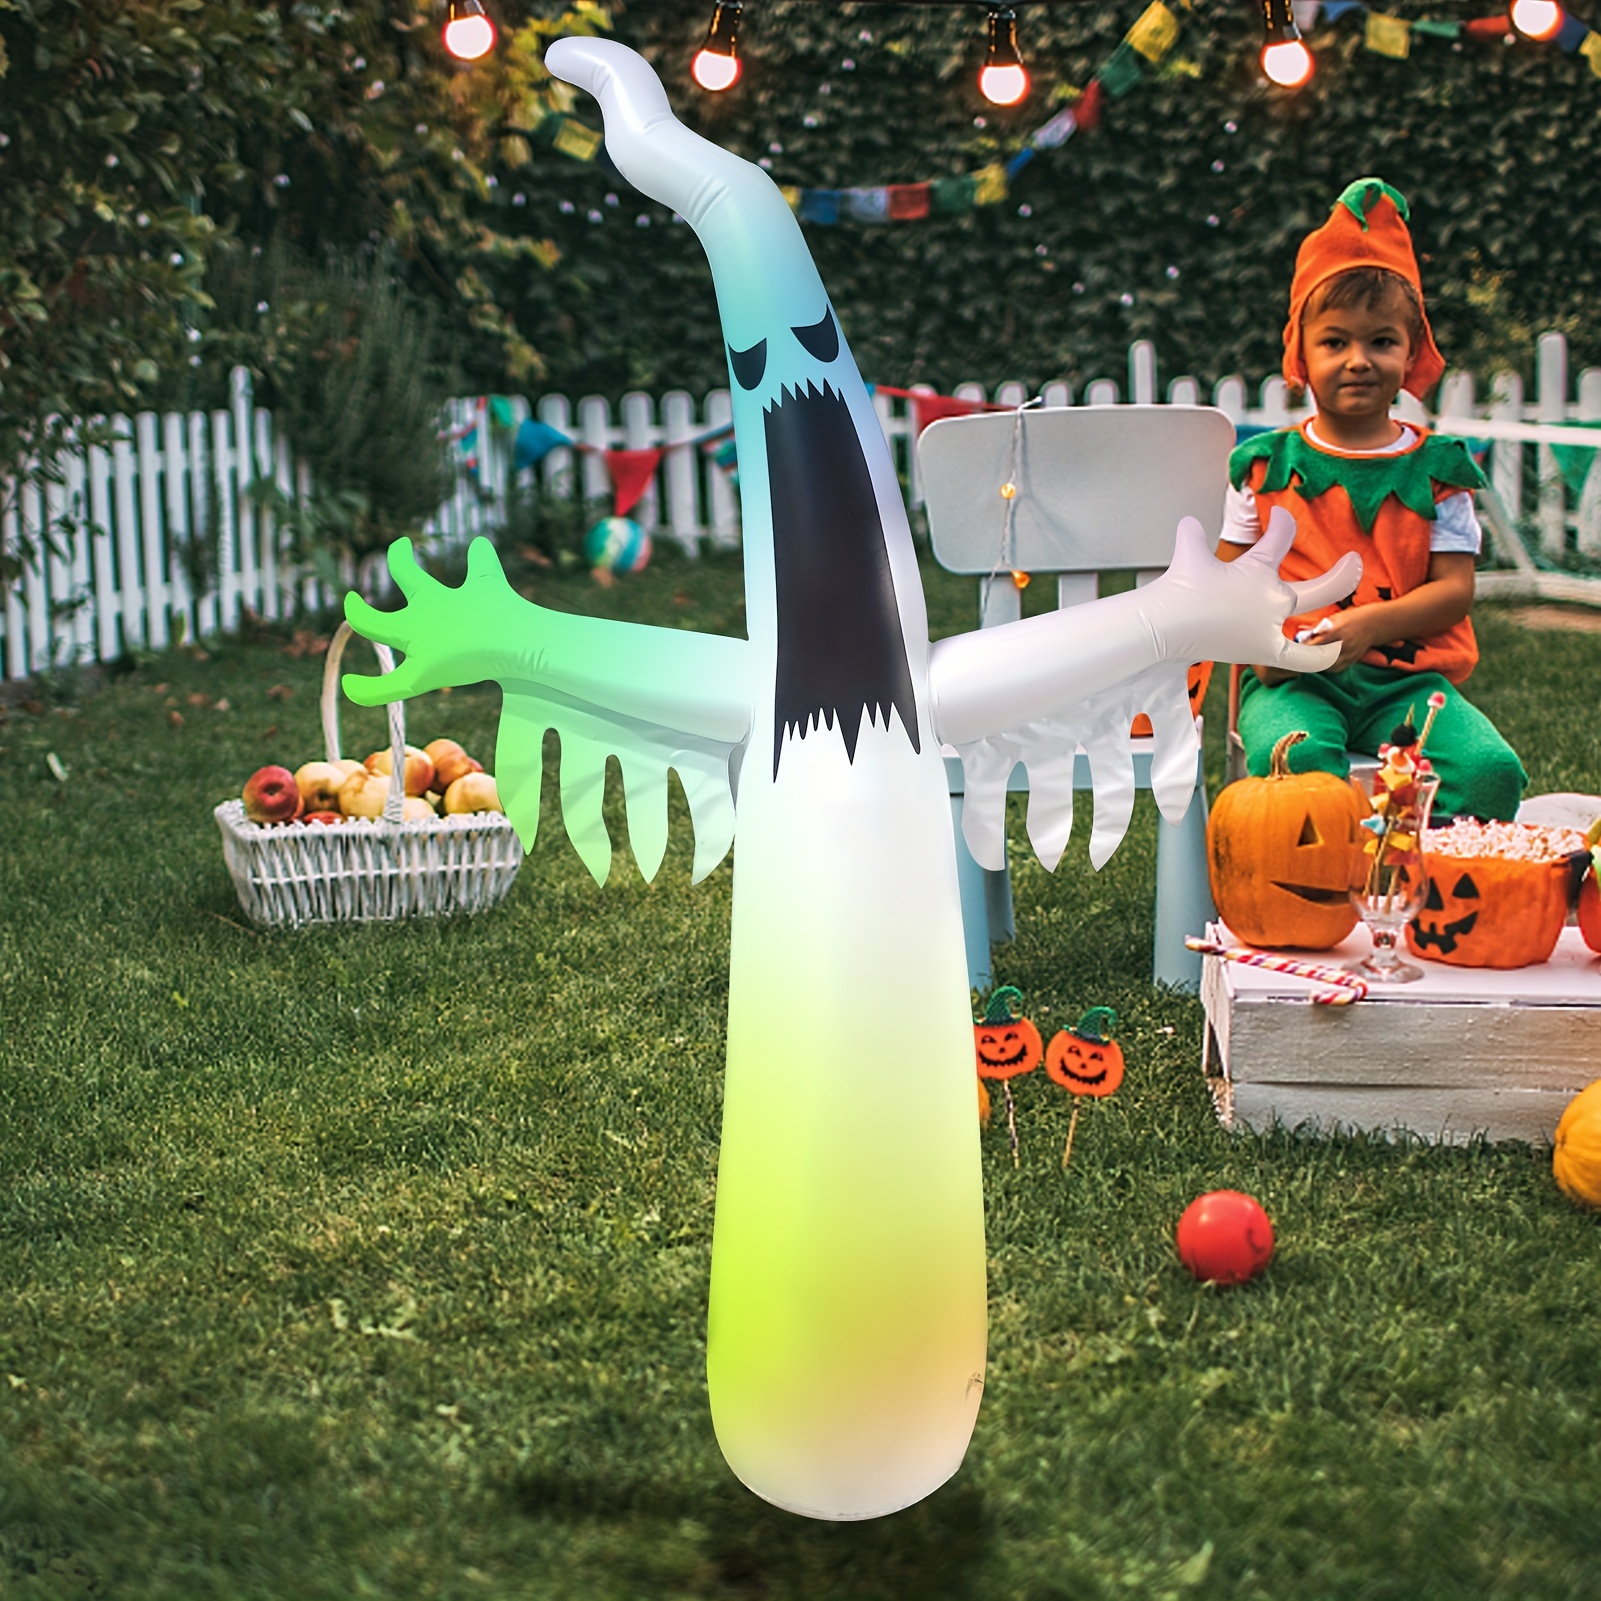 12 ft halloween inflatable towering terrible spooky ghost with build in led remote control for halloween ghost ornament home decor gift party indoor outdoor yard garden lawn decor details 4